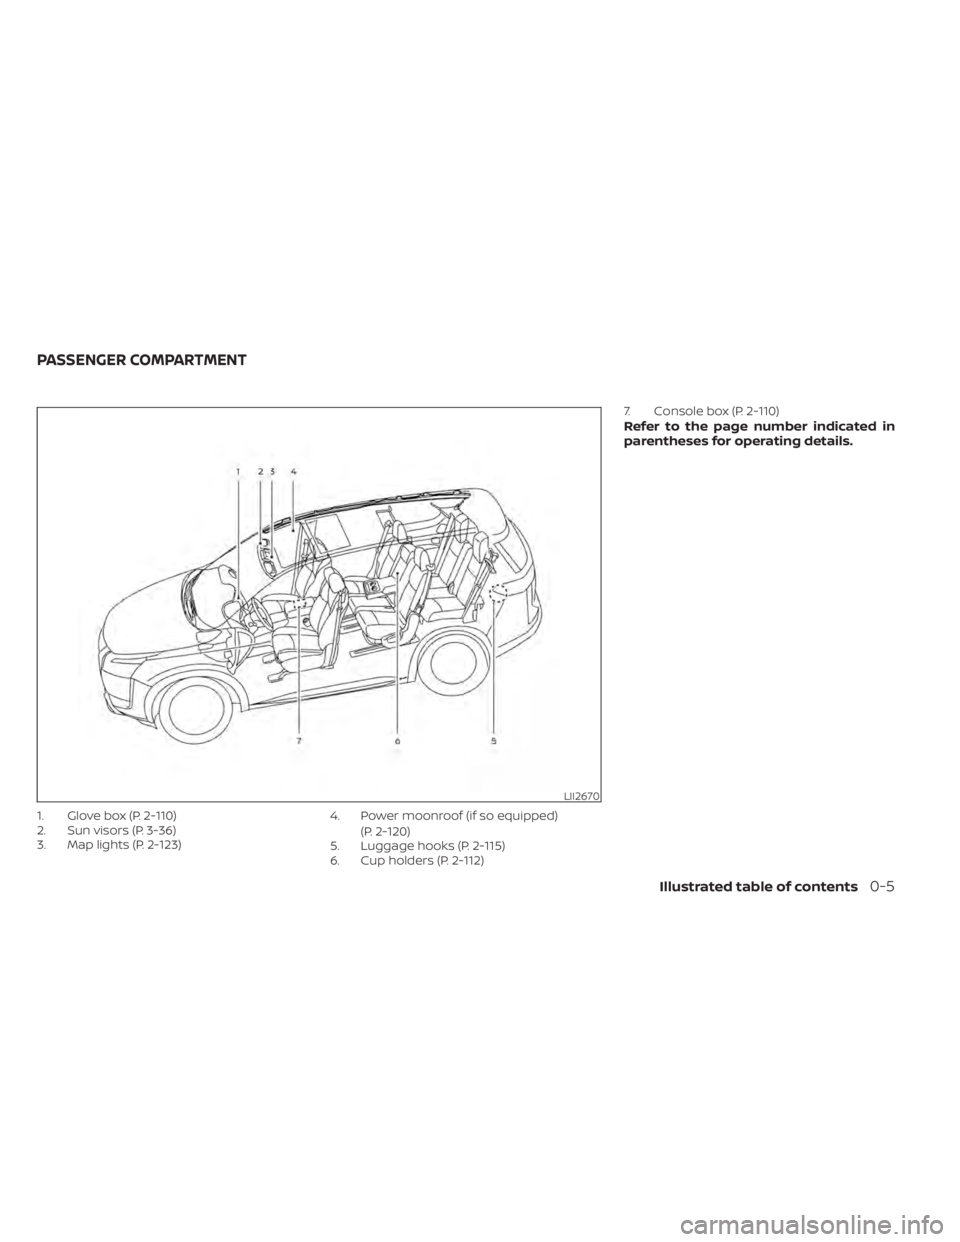 NISSAN PATHFINDER 2023 User Guide 1. Glove box (P. 2-110)
2. Sun visors (P. 3-36)
3. Map lights (P. 2-123)4. Power moonroof (if so equipped)
(P. 2-120)
5. Luggage hooks (P. 2-115)
6. Cup holders (P. 2-112) 7. Console box (P. 2-110)
Re